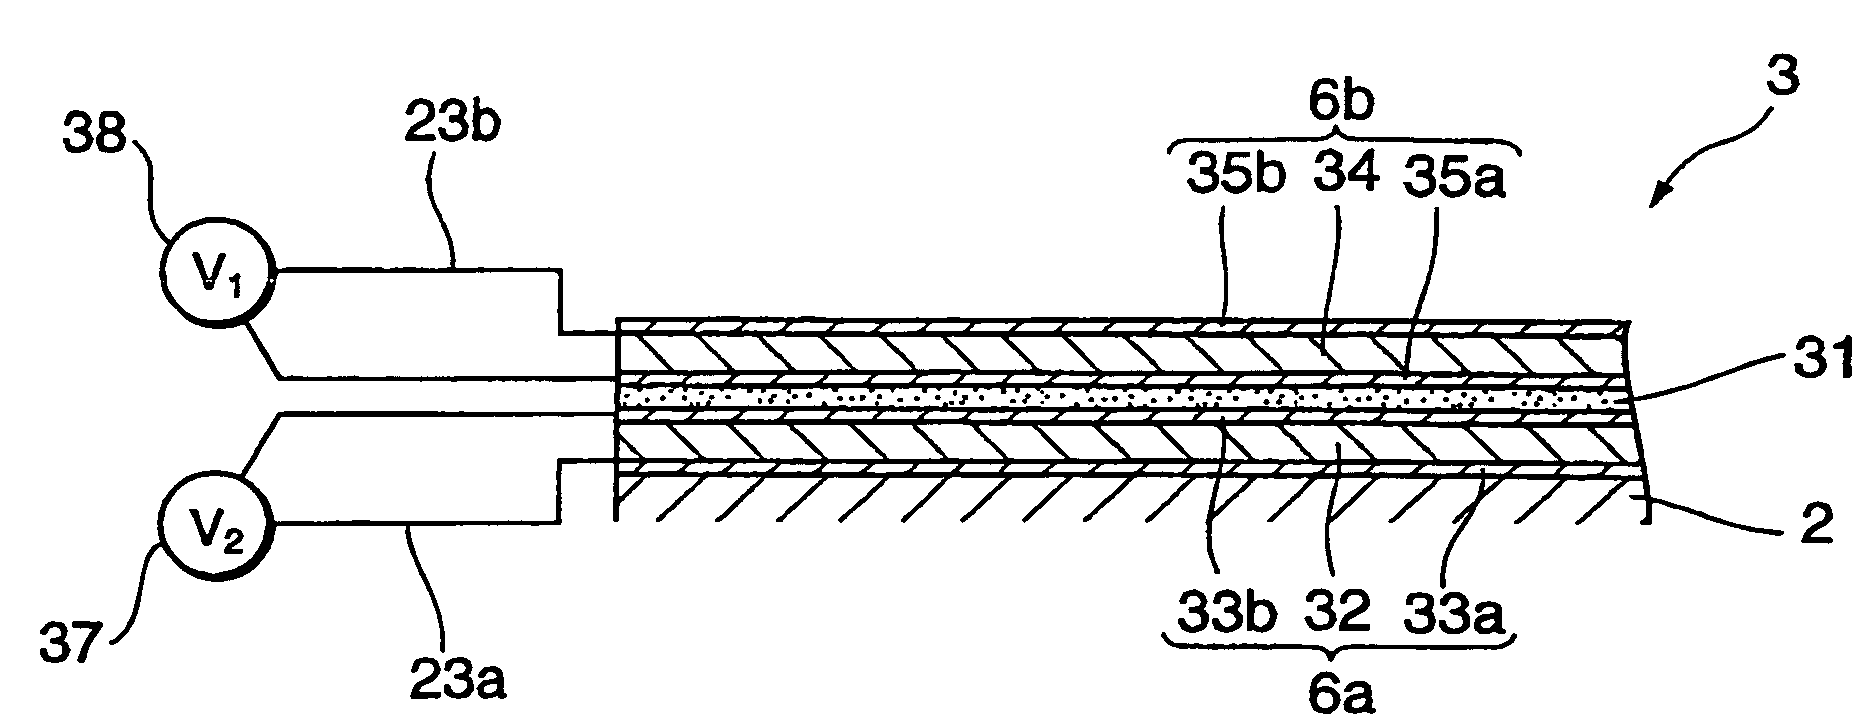 Flexible, suspension, and head gimbal assembly with piezoelectric layer units addressable by a voltage